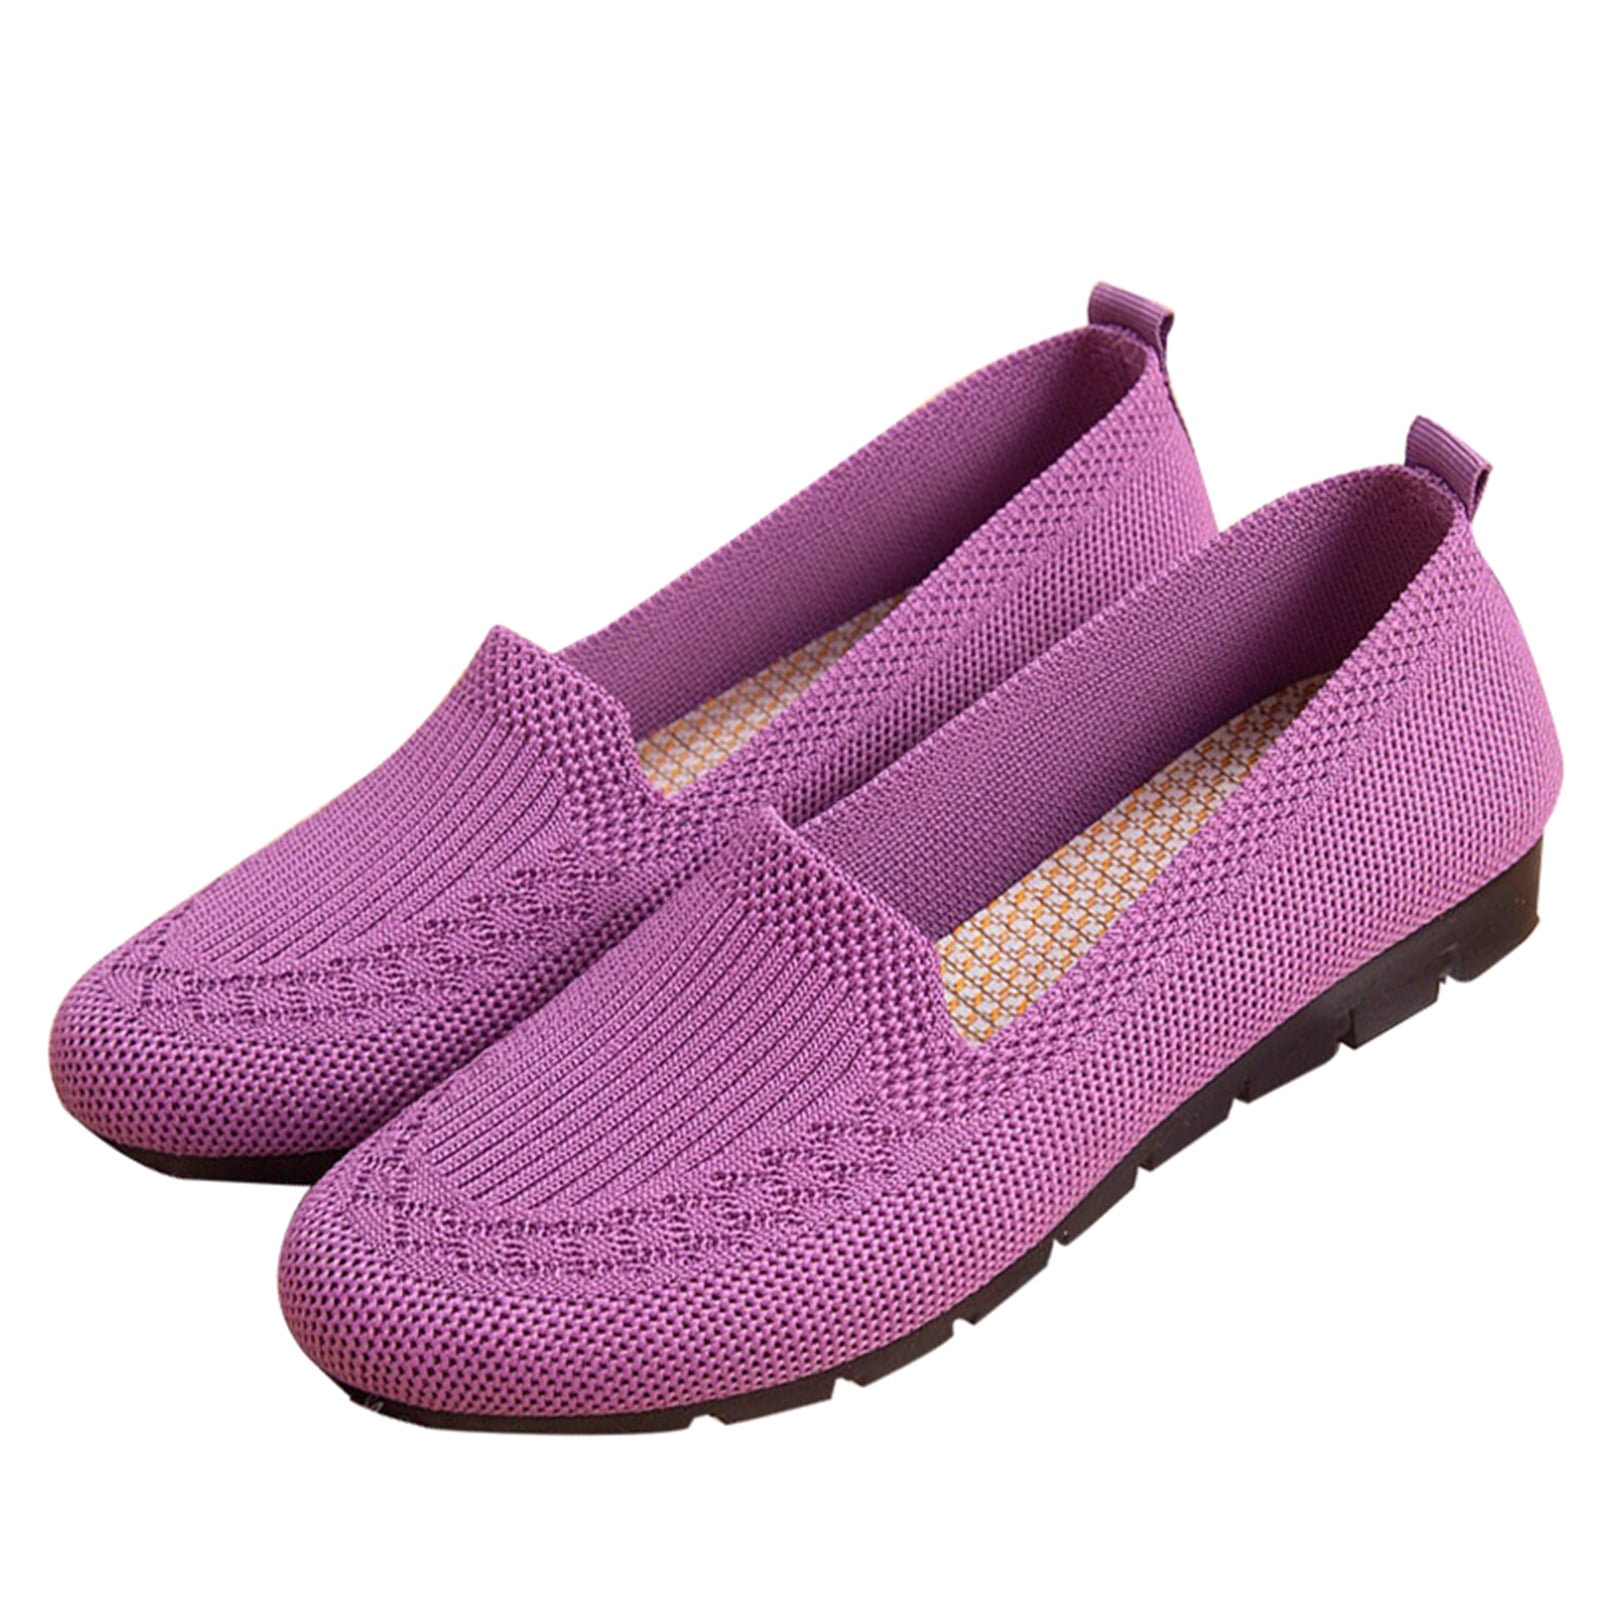 Knitted Fabric Loafers Flat Shoes Leisure Summer Soft Stretch Comfort ...